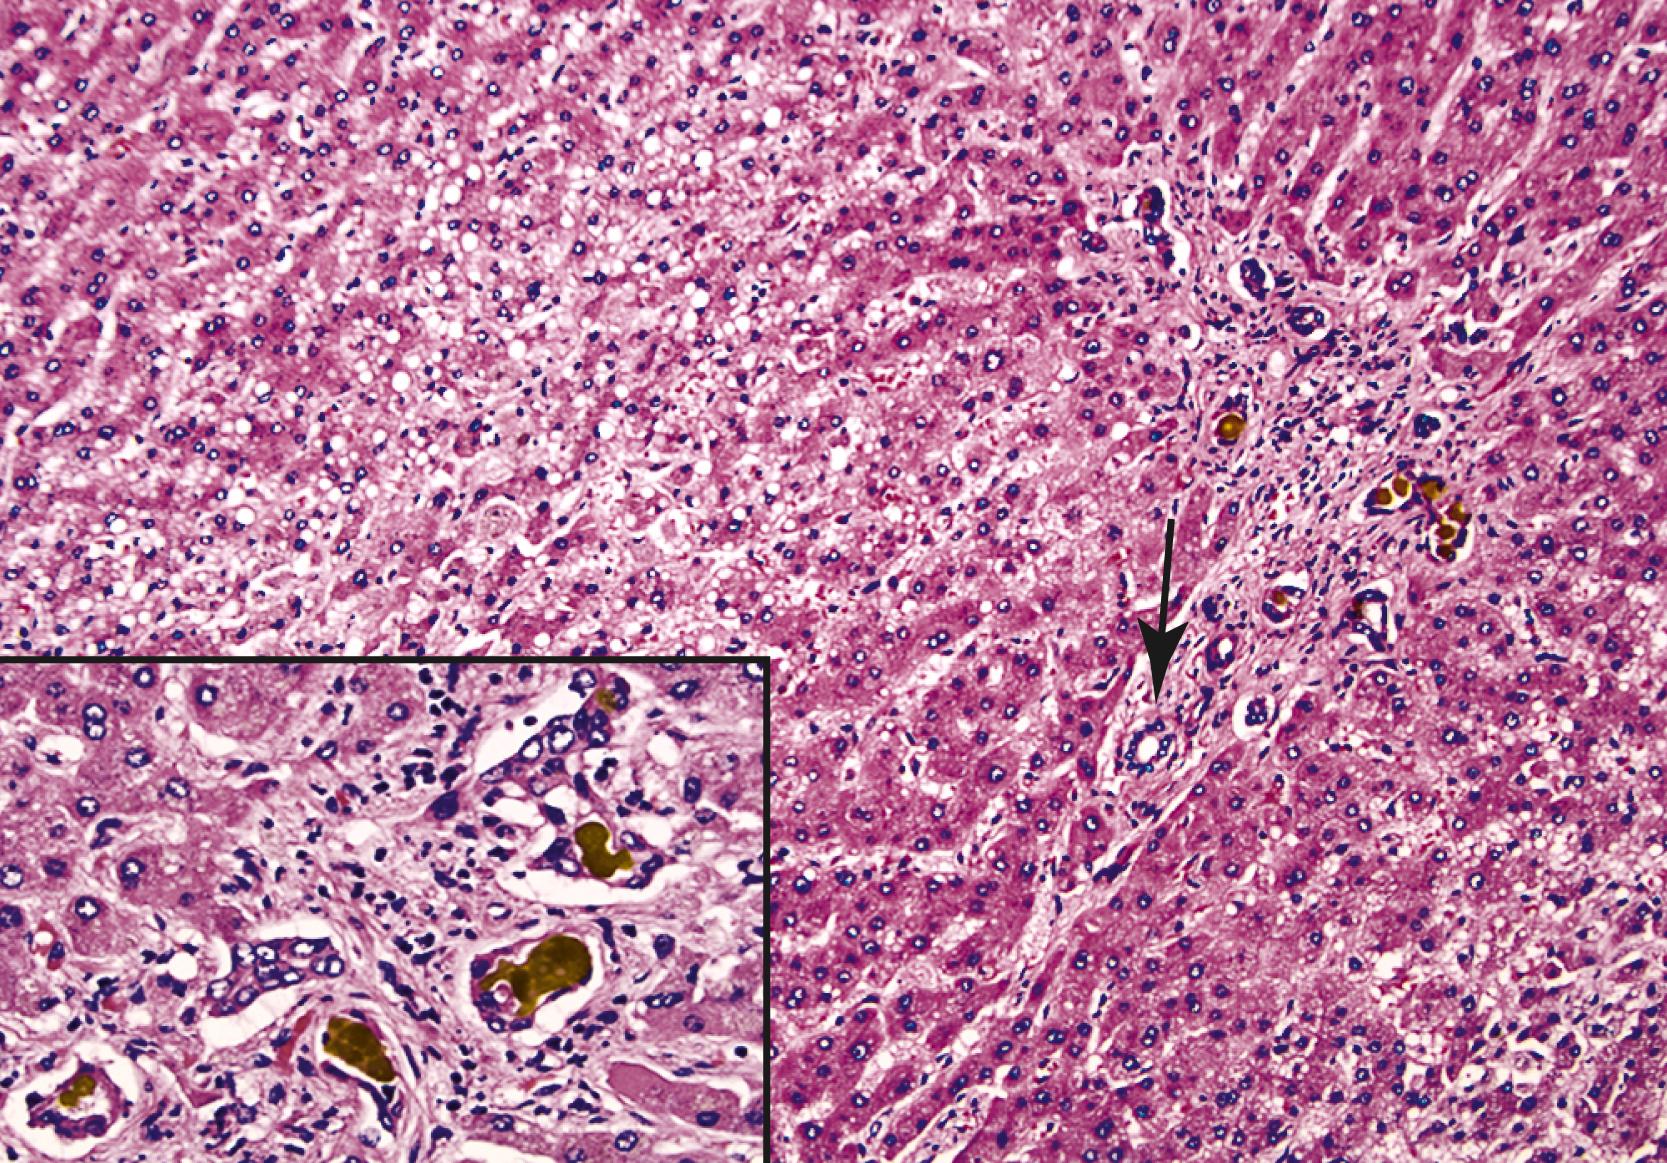 FIGURE 53.6, Severe preservation/reperfusion injury is characterized by centrilobular hepatocyte swelling, canalicular cholestasis, portal tract expansion, and cholangiolar proliferation. It is often accompanied by mild, nonspecific inflammation and cholangiolar bile plugs (inset). Note the absence of edema around the true bile duct (arrow) and the inflammation around the cholangioles at the interface zone. These features help distinguish preservation injury from biliary obstruction.